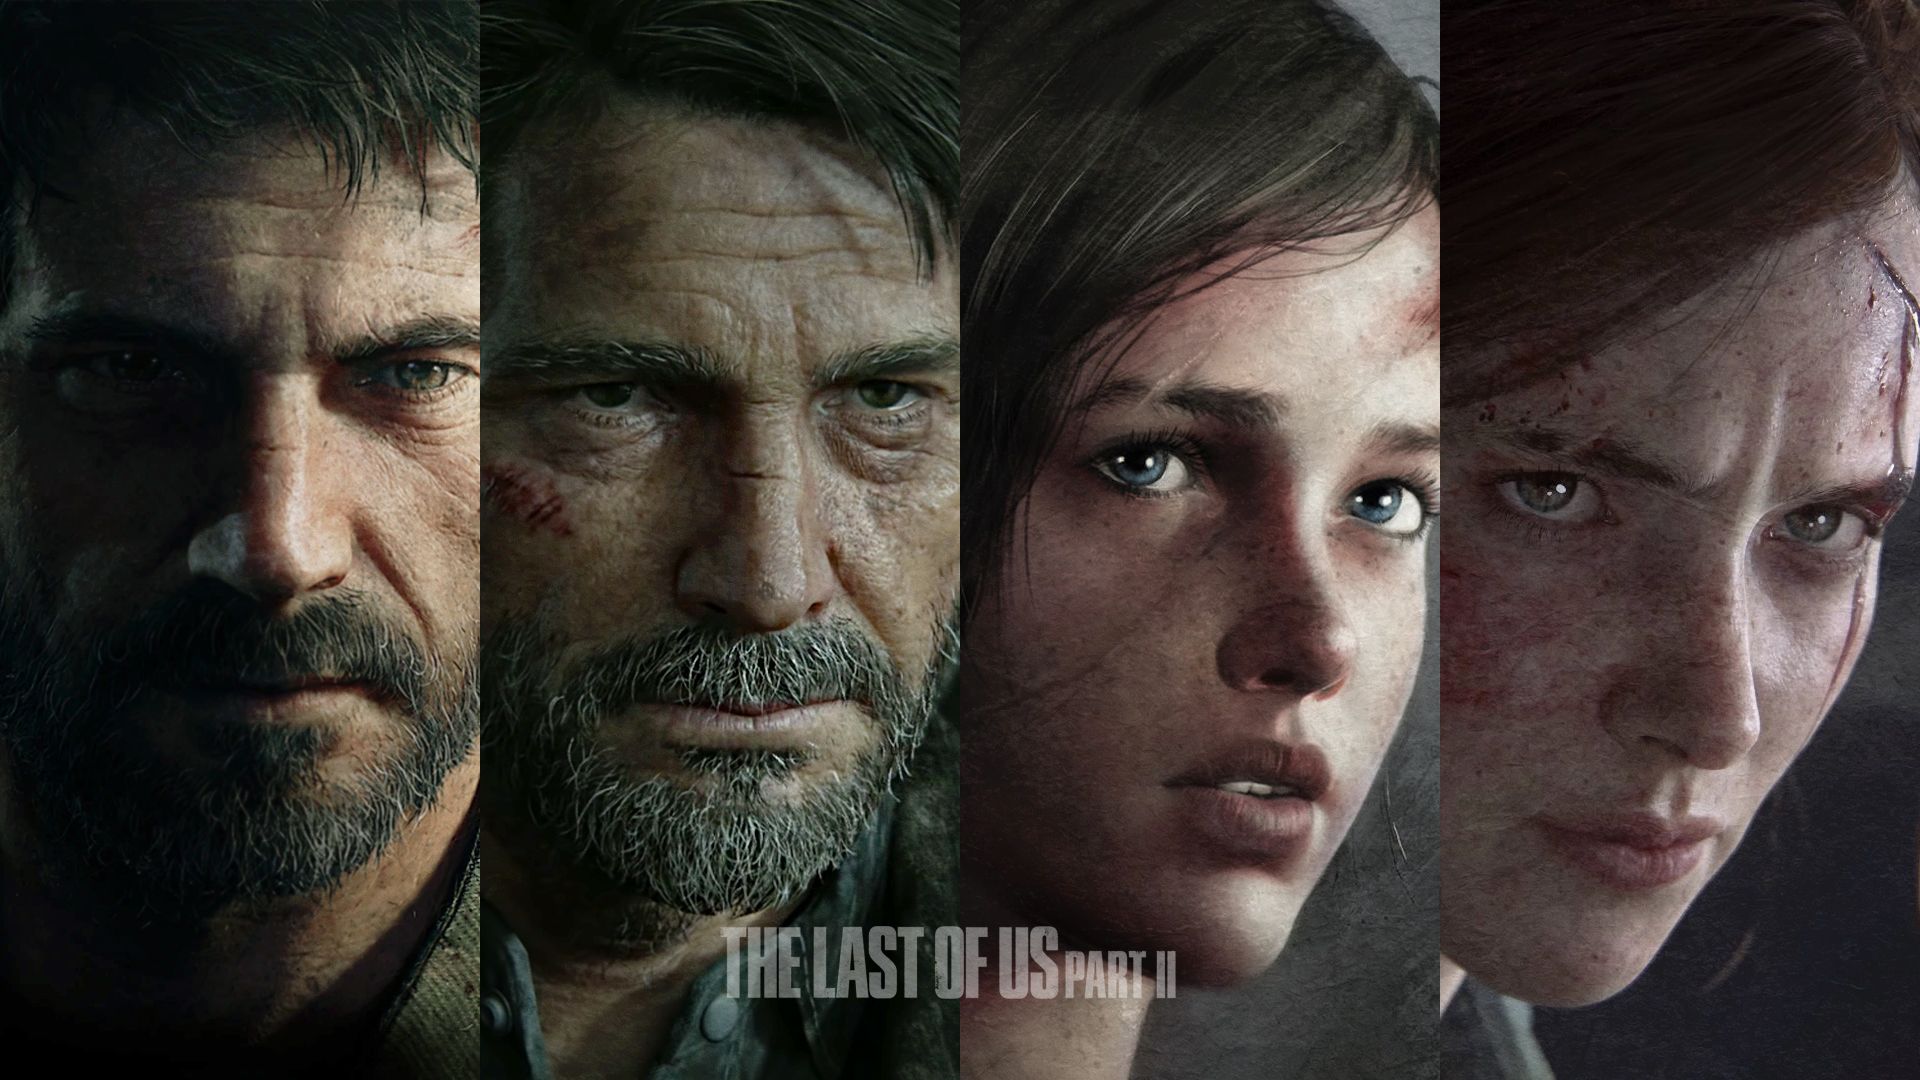 Wallpaper, The Last of Us, The Last of Us video games, PlayStation PlayStation Sony, Naughty Dog, Joel, Ellie 1920x1080